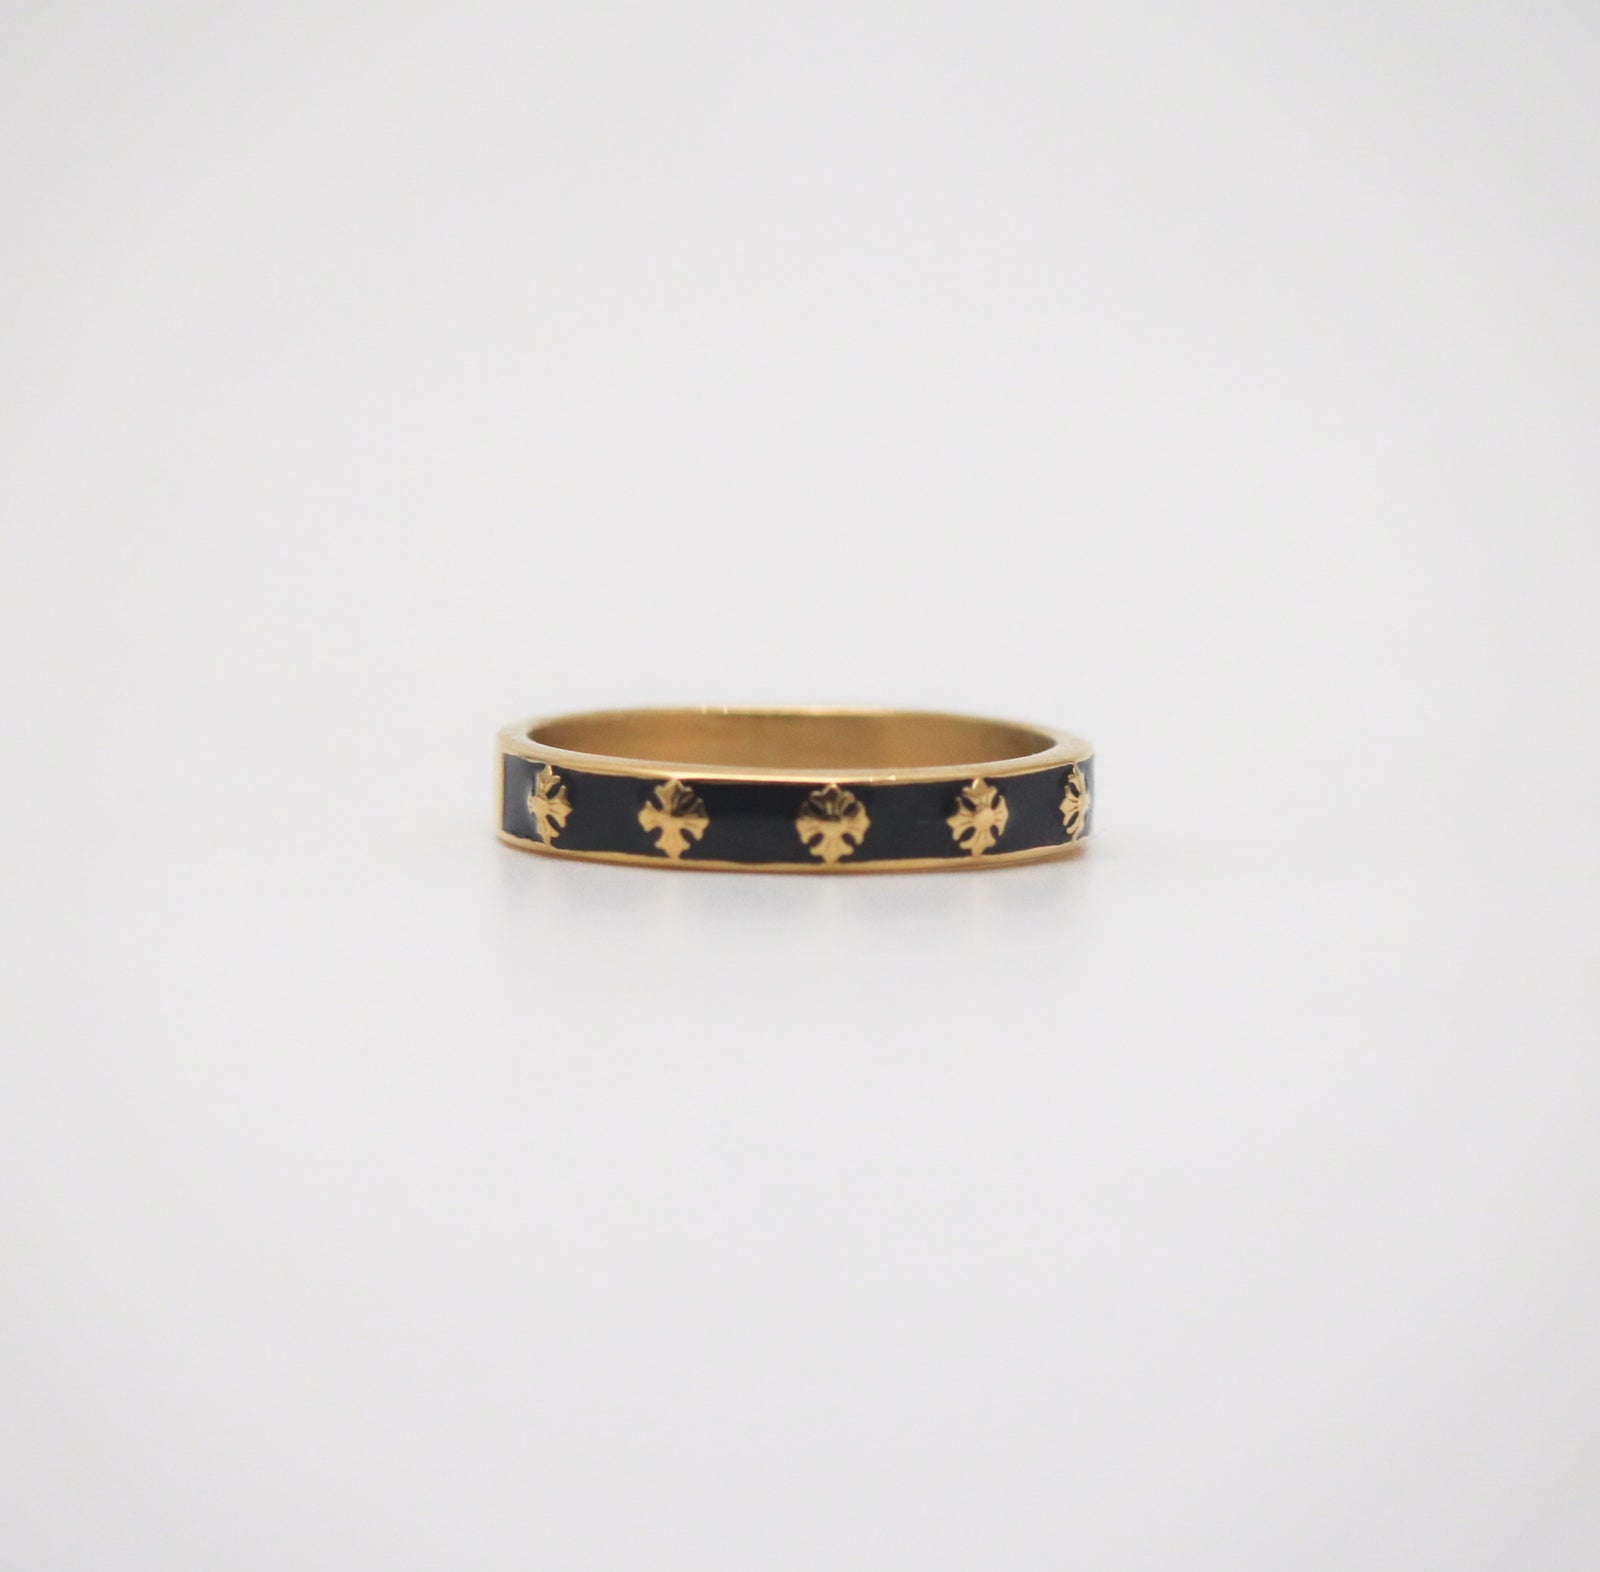 thin black band ring with black enamel and cross patterns